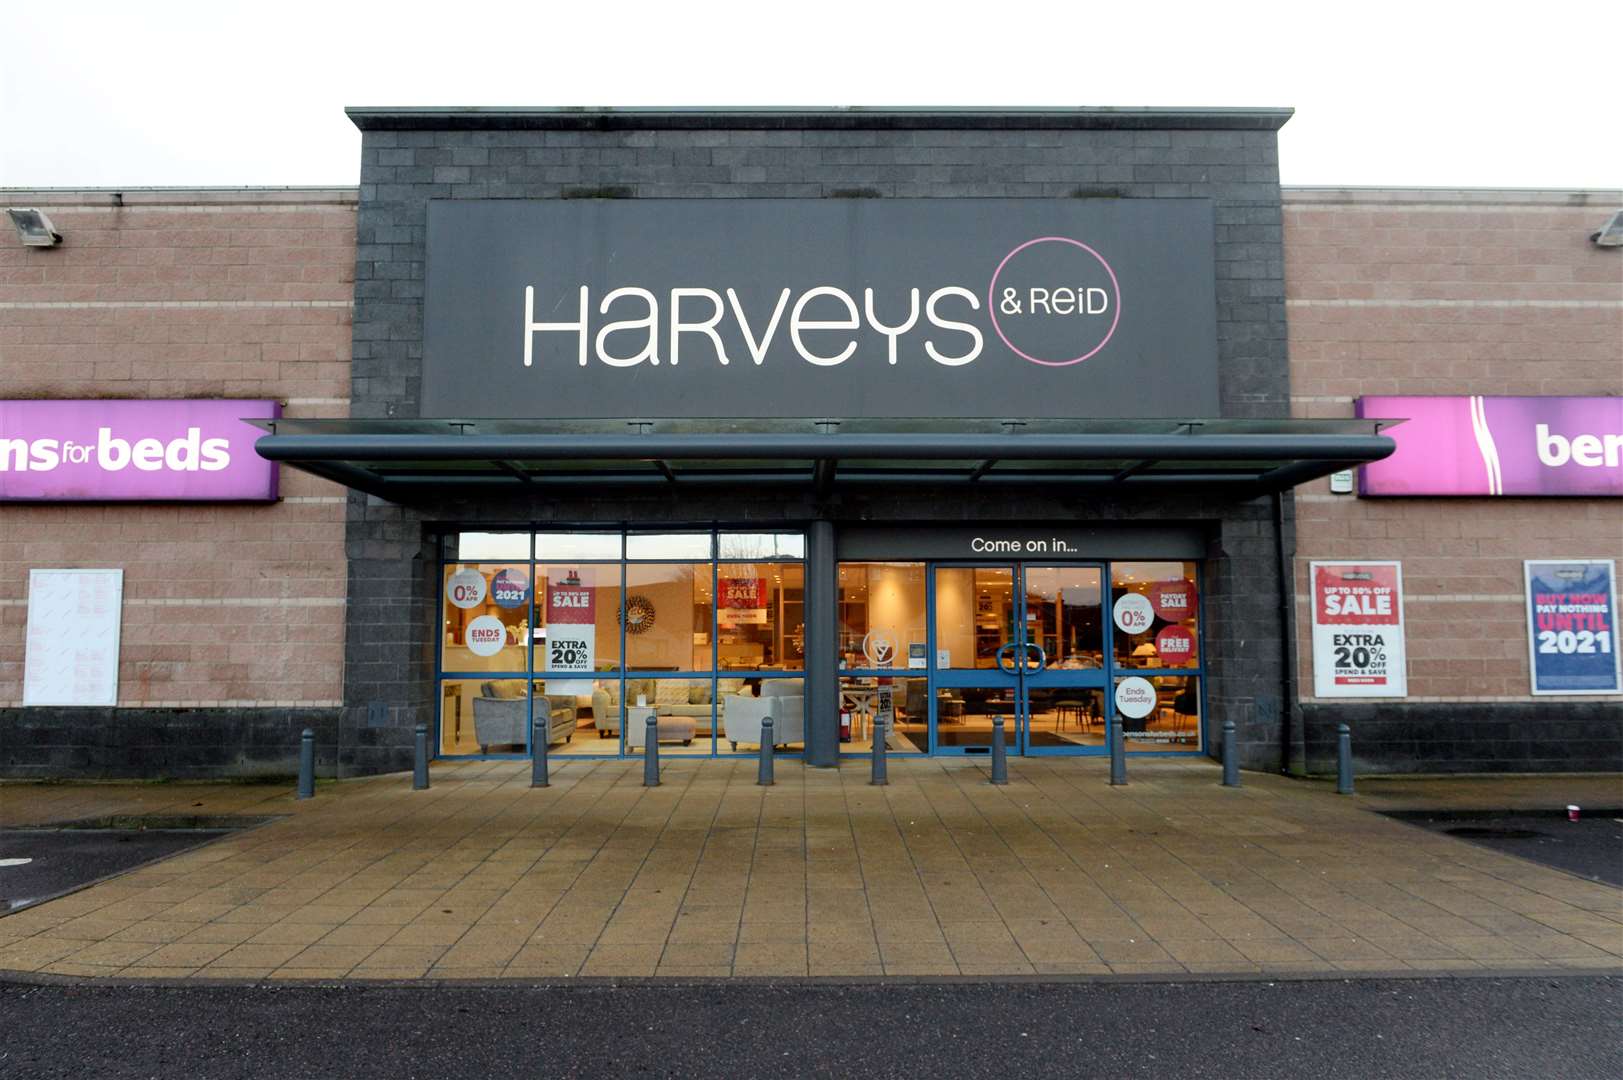 Harveys and Bensons for Beds.